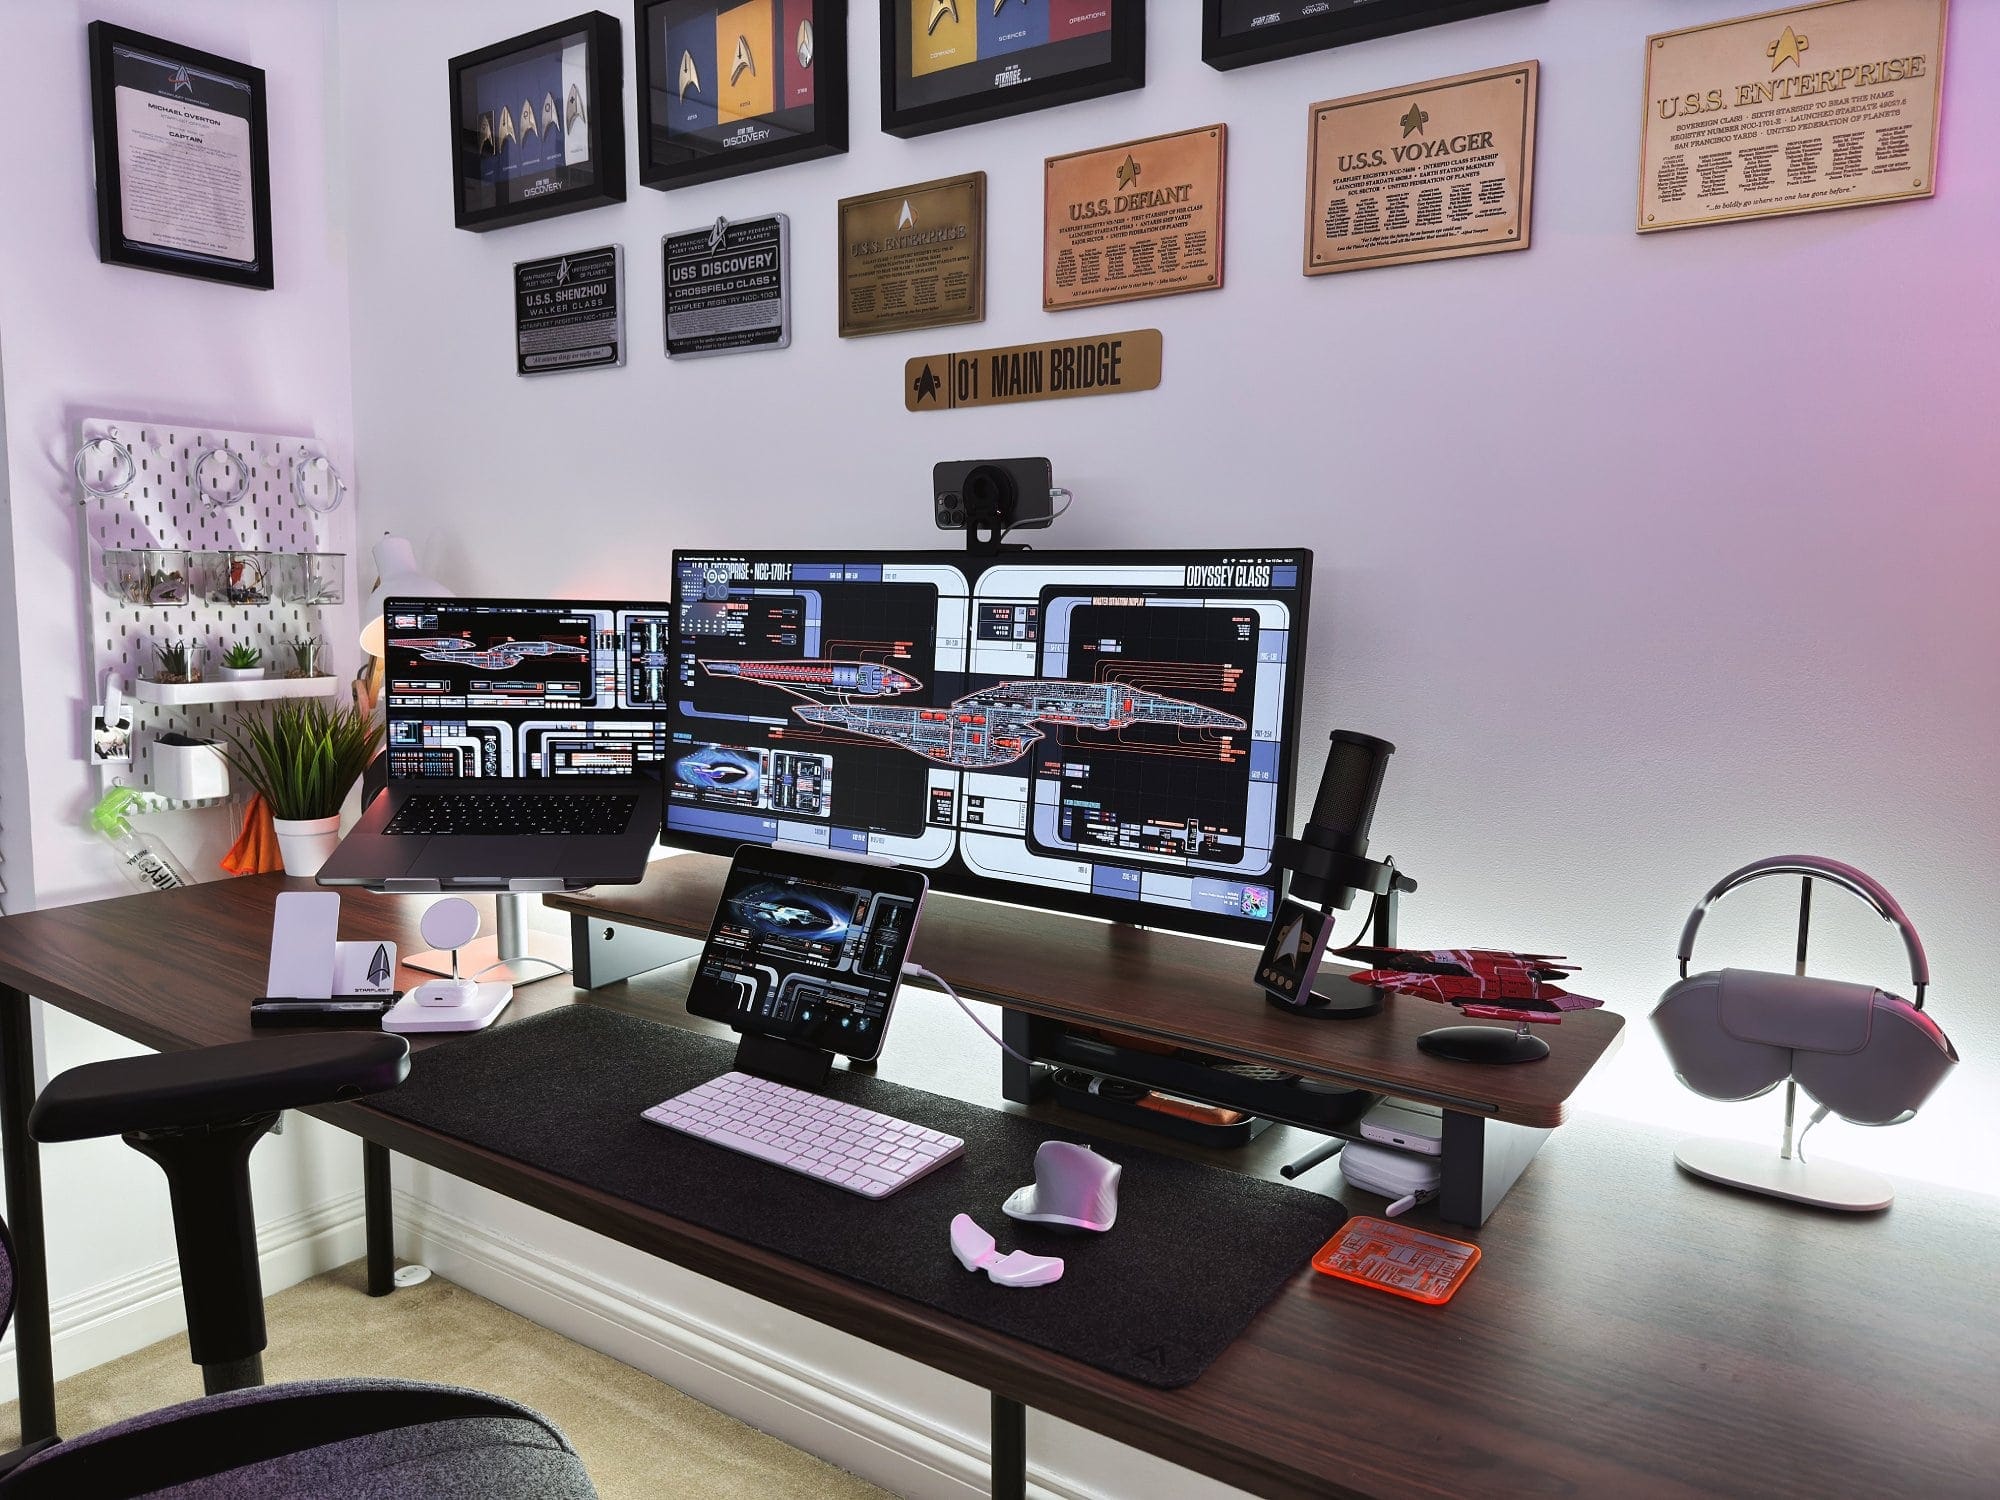 A sleek workspace with a multi-monitor setup featuring Star Trek graphics, a laptop, tablet, microphone, and headphones, with Star Trek memorabilia in the background